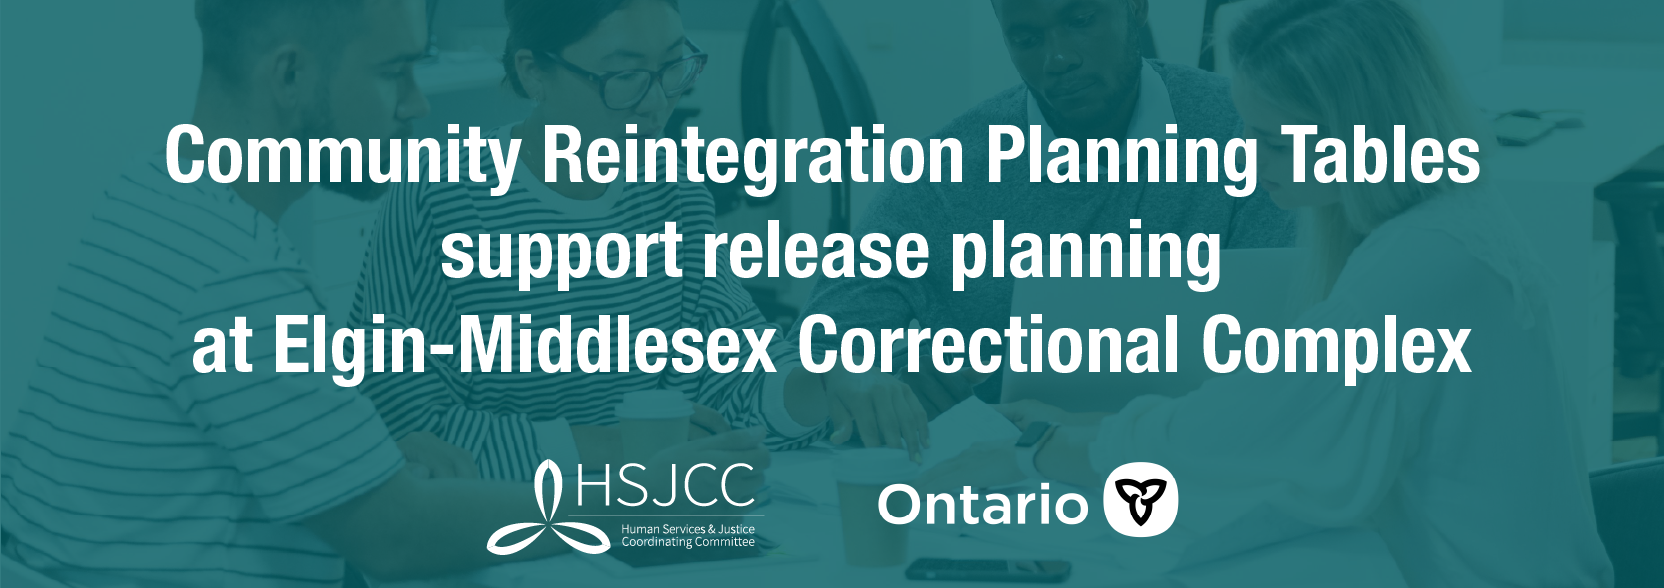 A banner to introduce the Community Reintegration Planning Tables supporting release planning at Elgin-Middlesex Correctional Complex, supported by the Province of Ontario and the Human Services Justice Coordinating Committee (HSJCC)